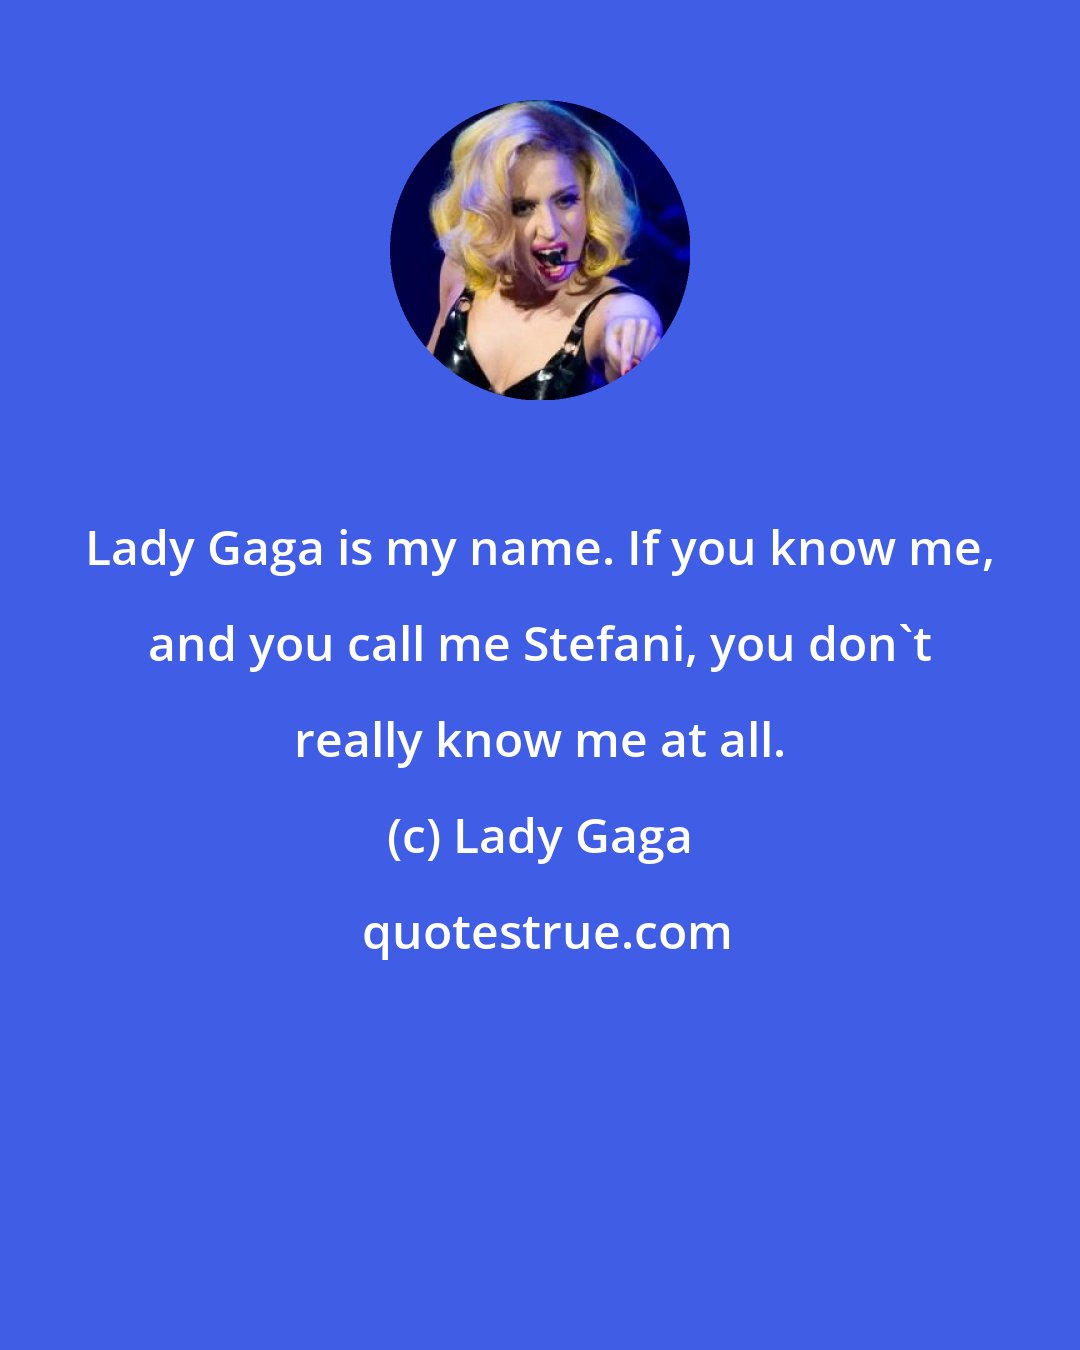 Lady Gaga: Lady Gaga is my name. If you know me, and you call me Stefani, you don't really know me at all.